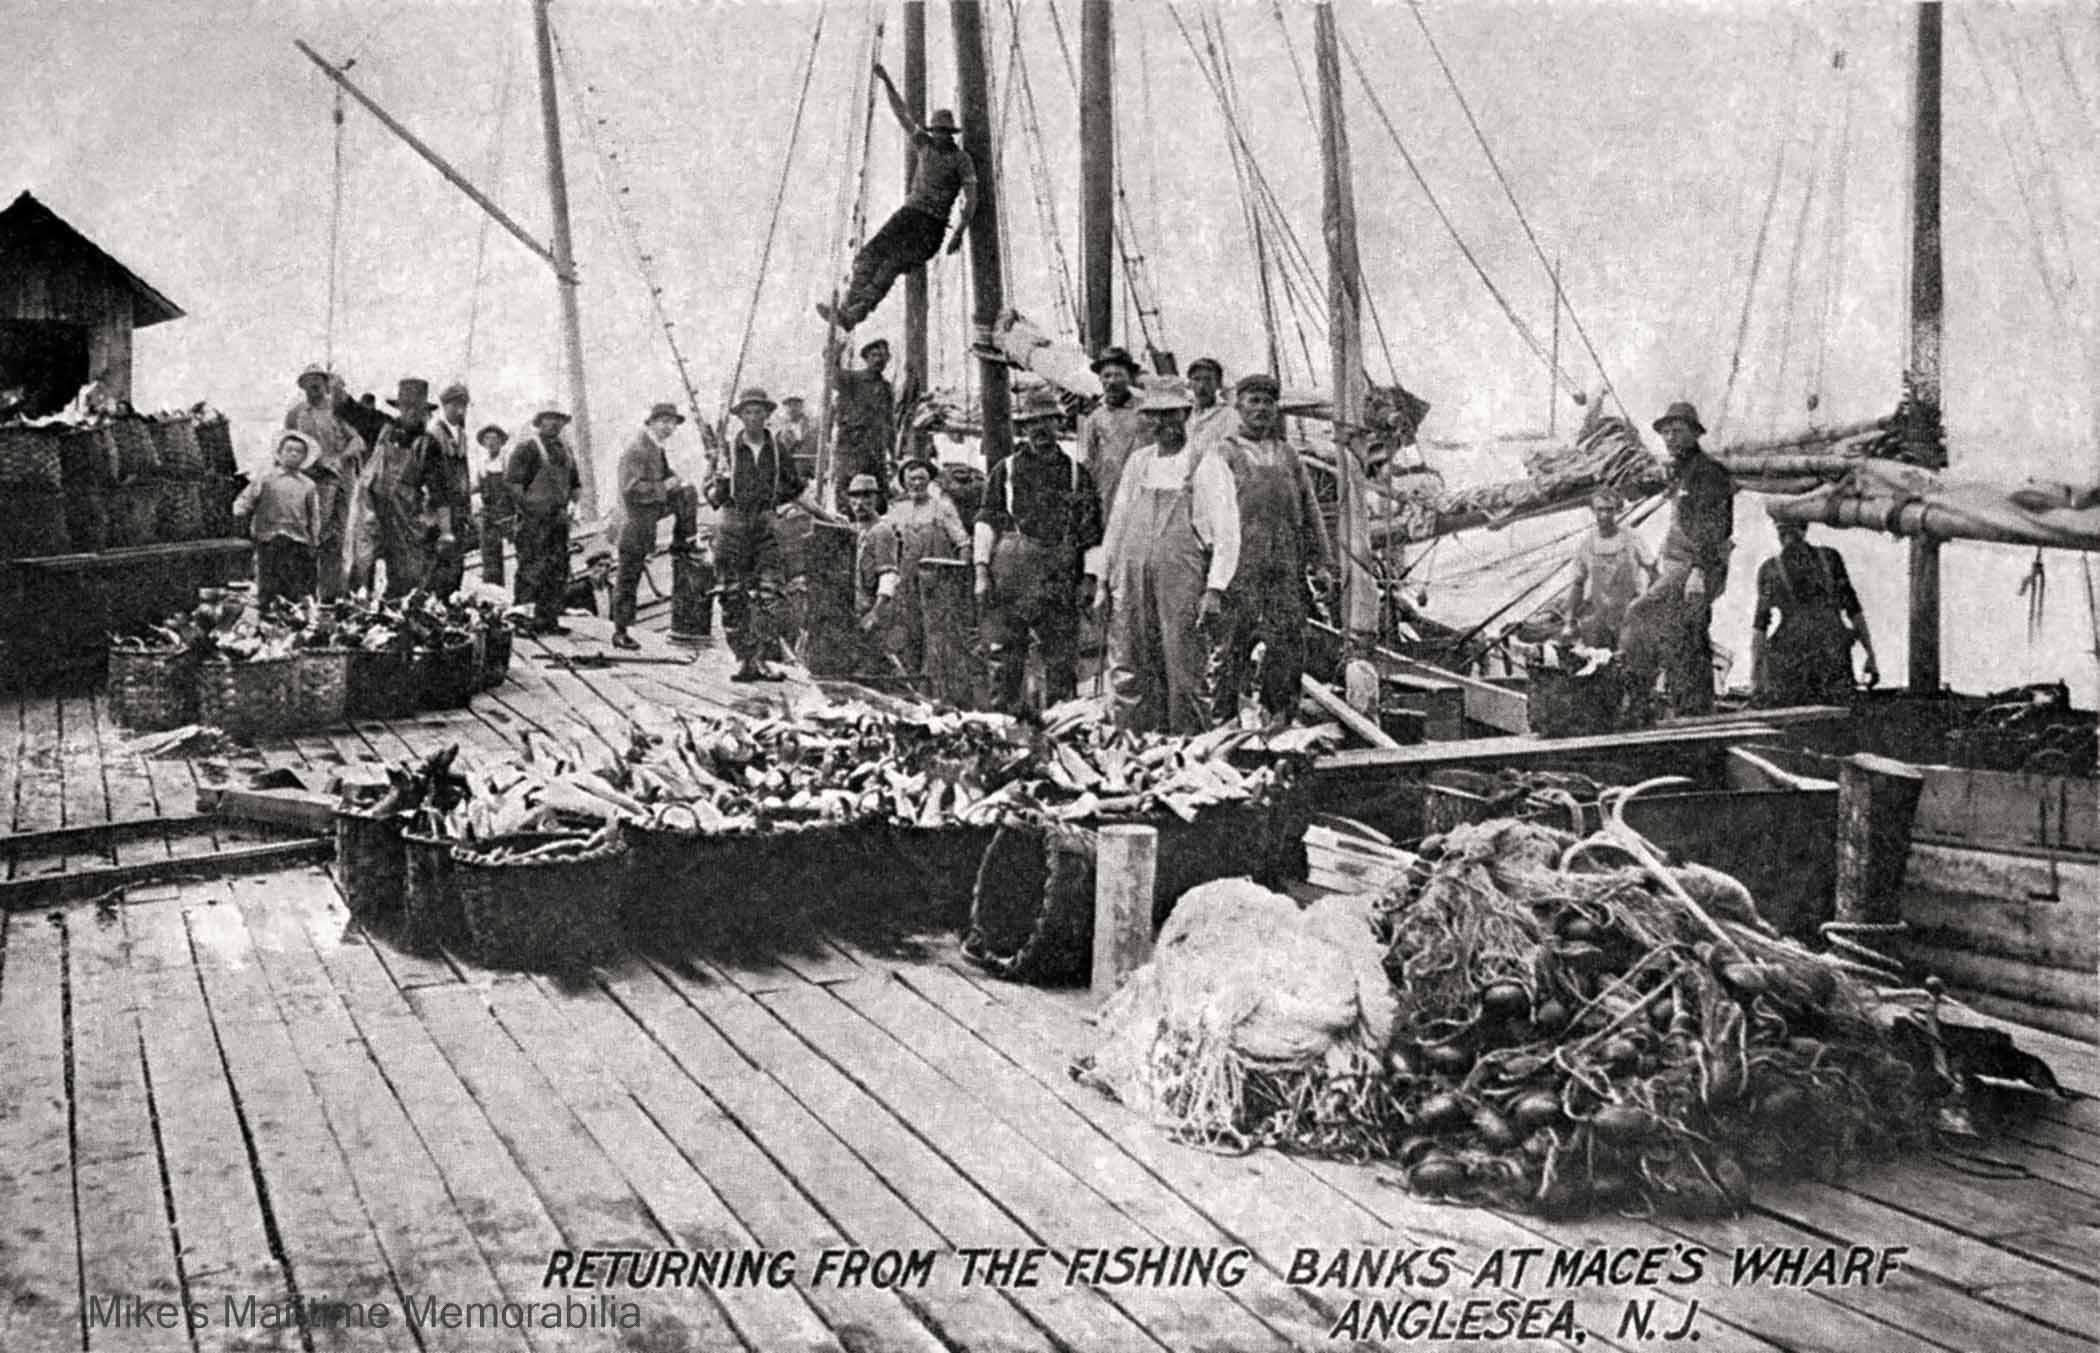 MACE'S WHARF, Anglesea, NJ – 1904 "Returning from the Fishing Banks at Mace's Wharf". This vintage 1904 photo depicts a group of commercial fishermen and a large catch of what appears to be baskets of bluefish. In the background, a group of sailing sloops are visible. In 1917, Anglesea became part of the City of North Wildwood, NJ.